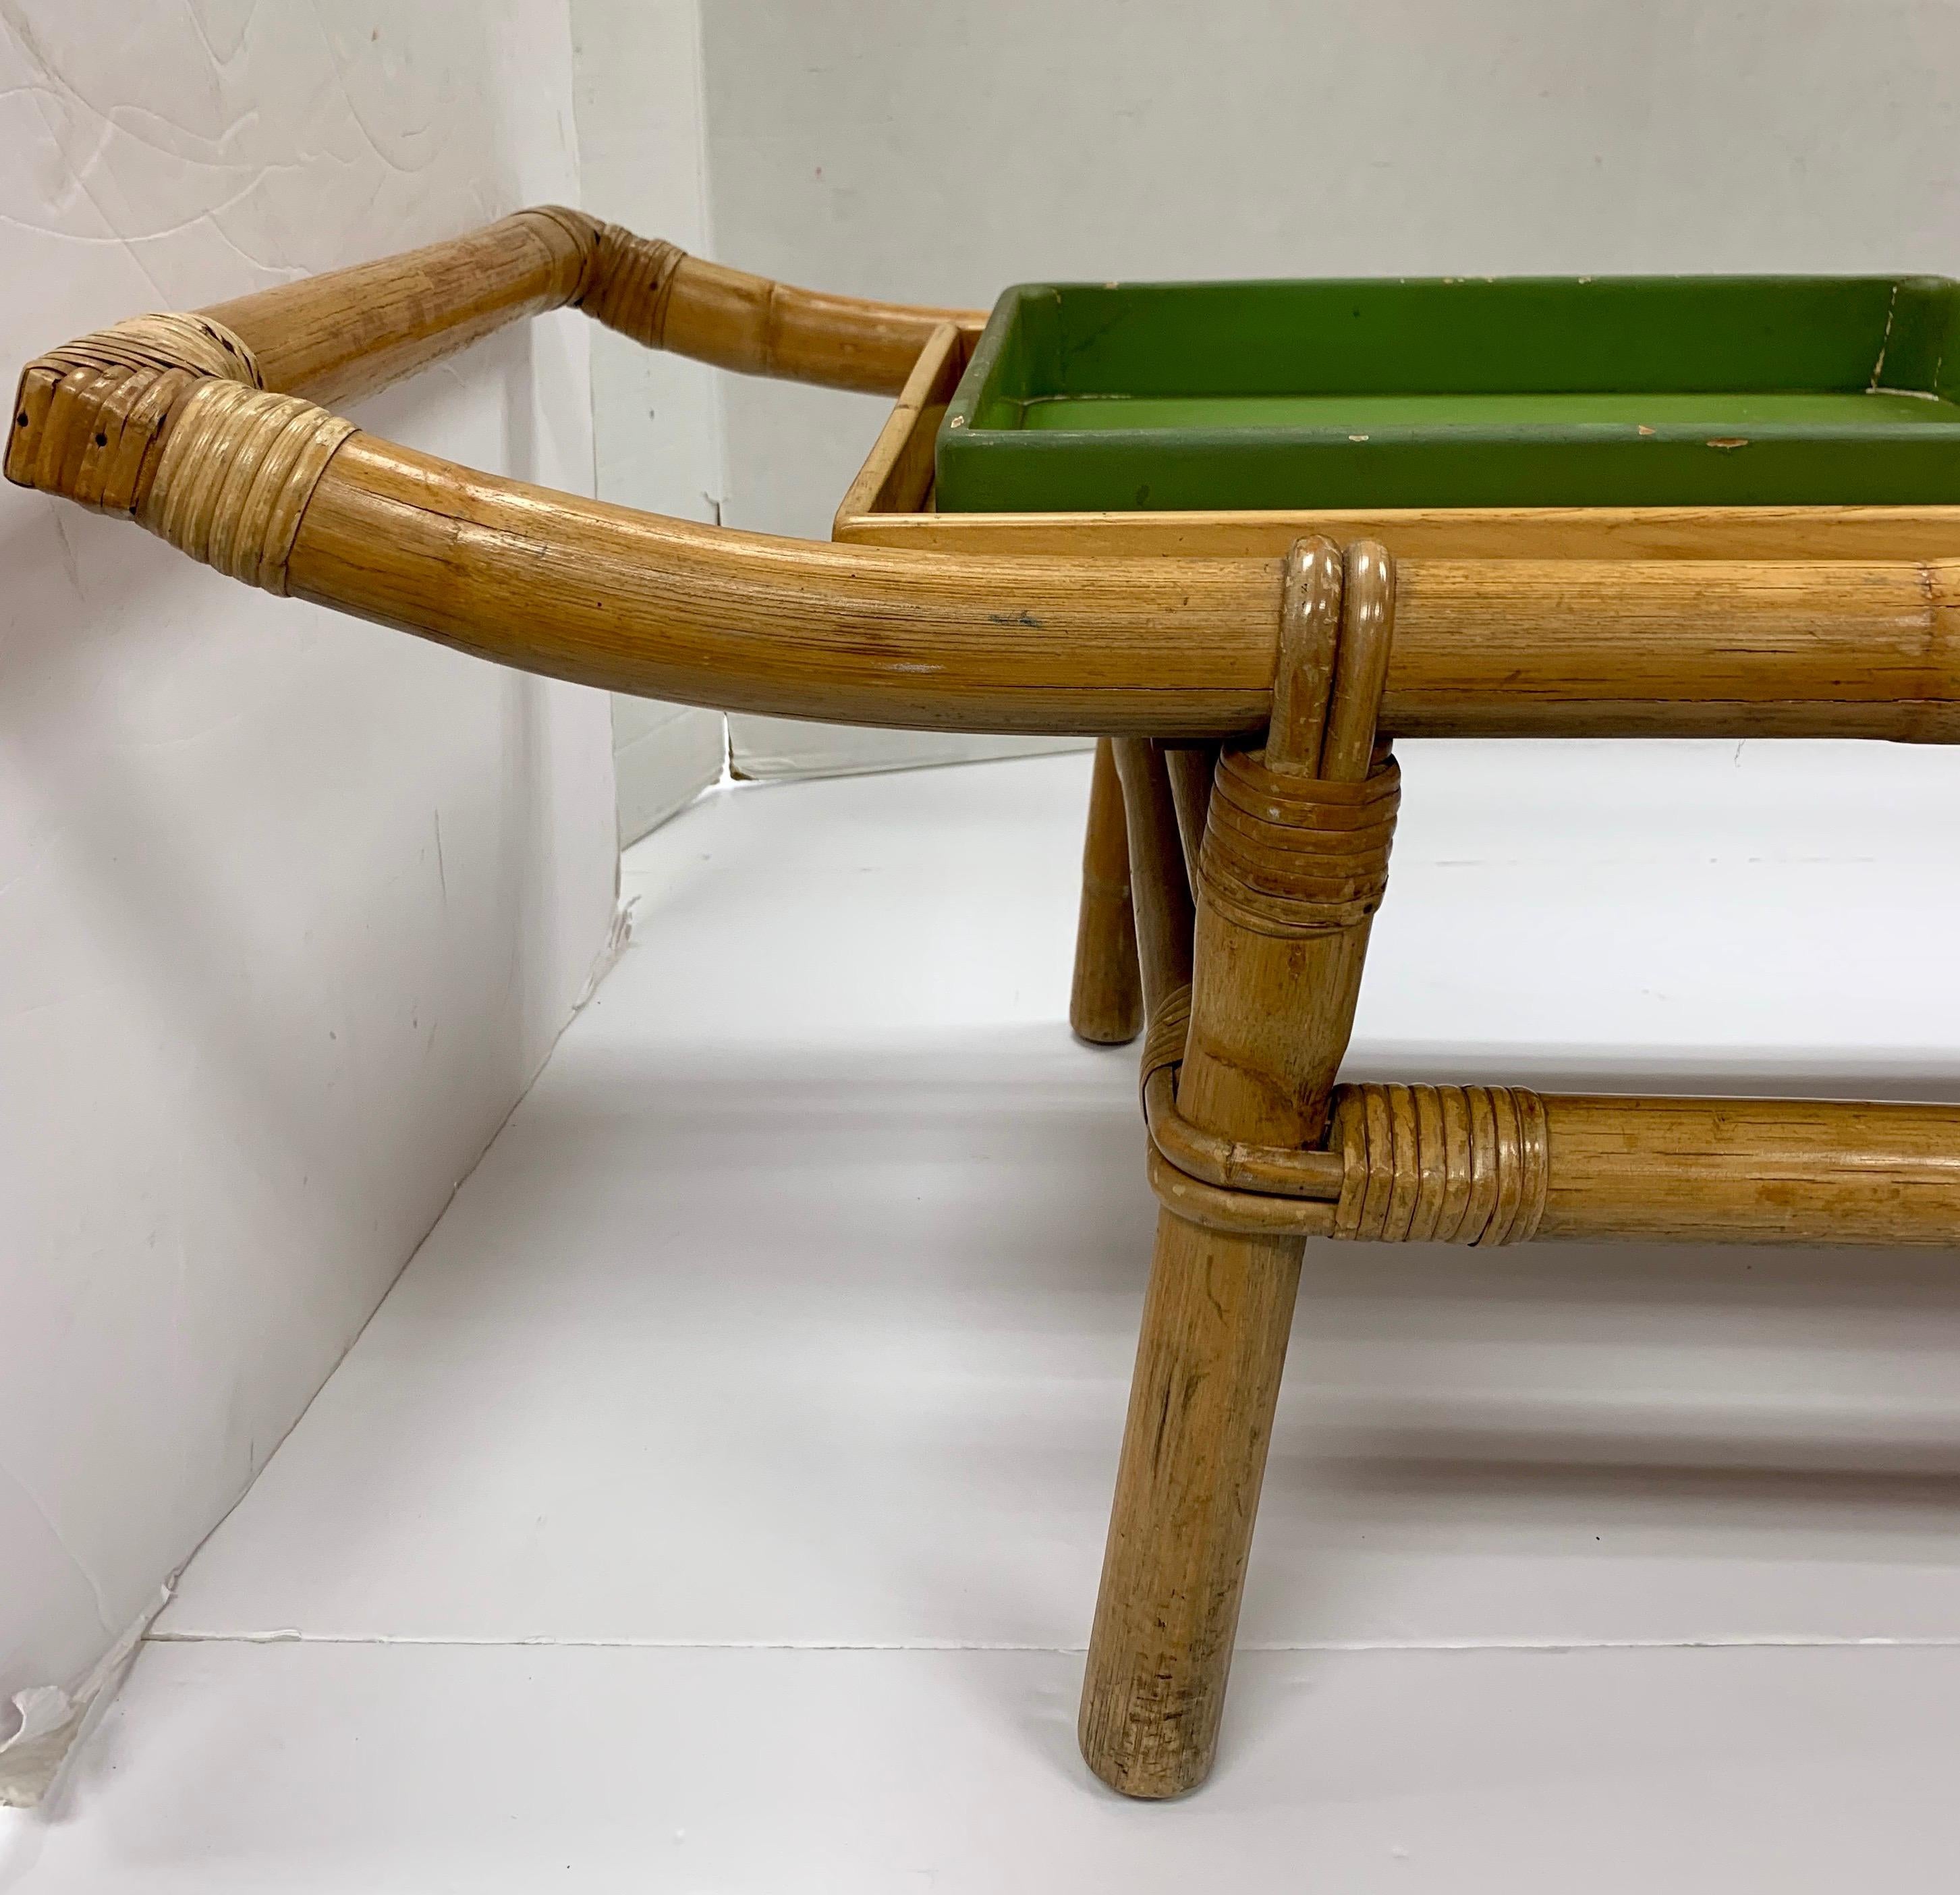 A coveted pagoda form coffee table or bench designed by John Wisner and manufactured for Ficks Reed. This rare Ficks Reed Classic is completely original piece including the green removable trays that adorn each side.
  
The piece is expertly